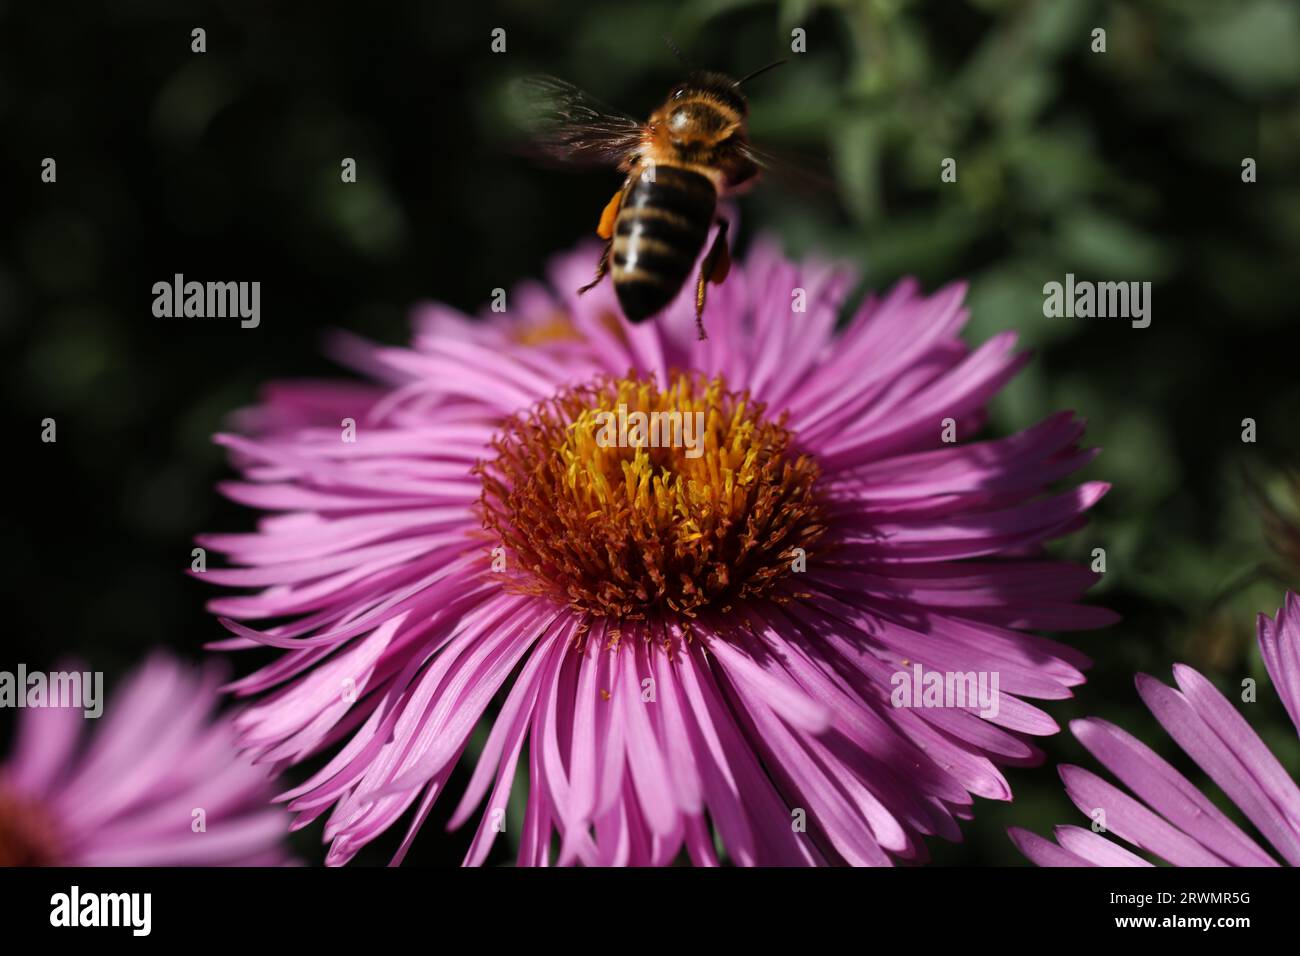 a close up of a honey bee on a pink aster flower in the garden Stock Photo